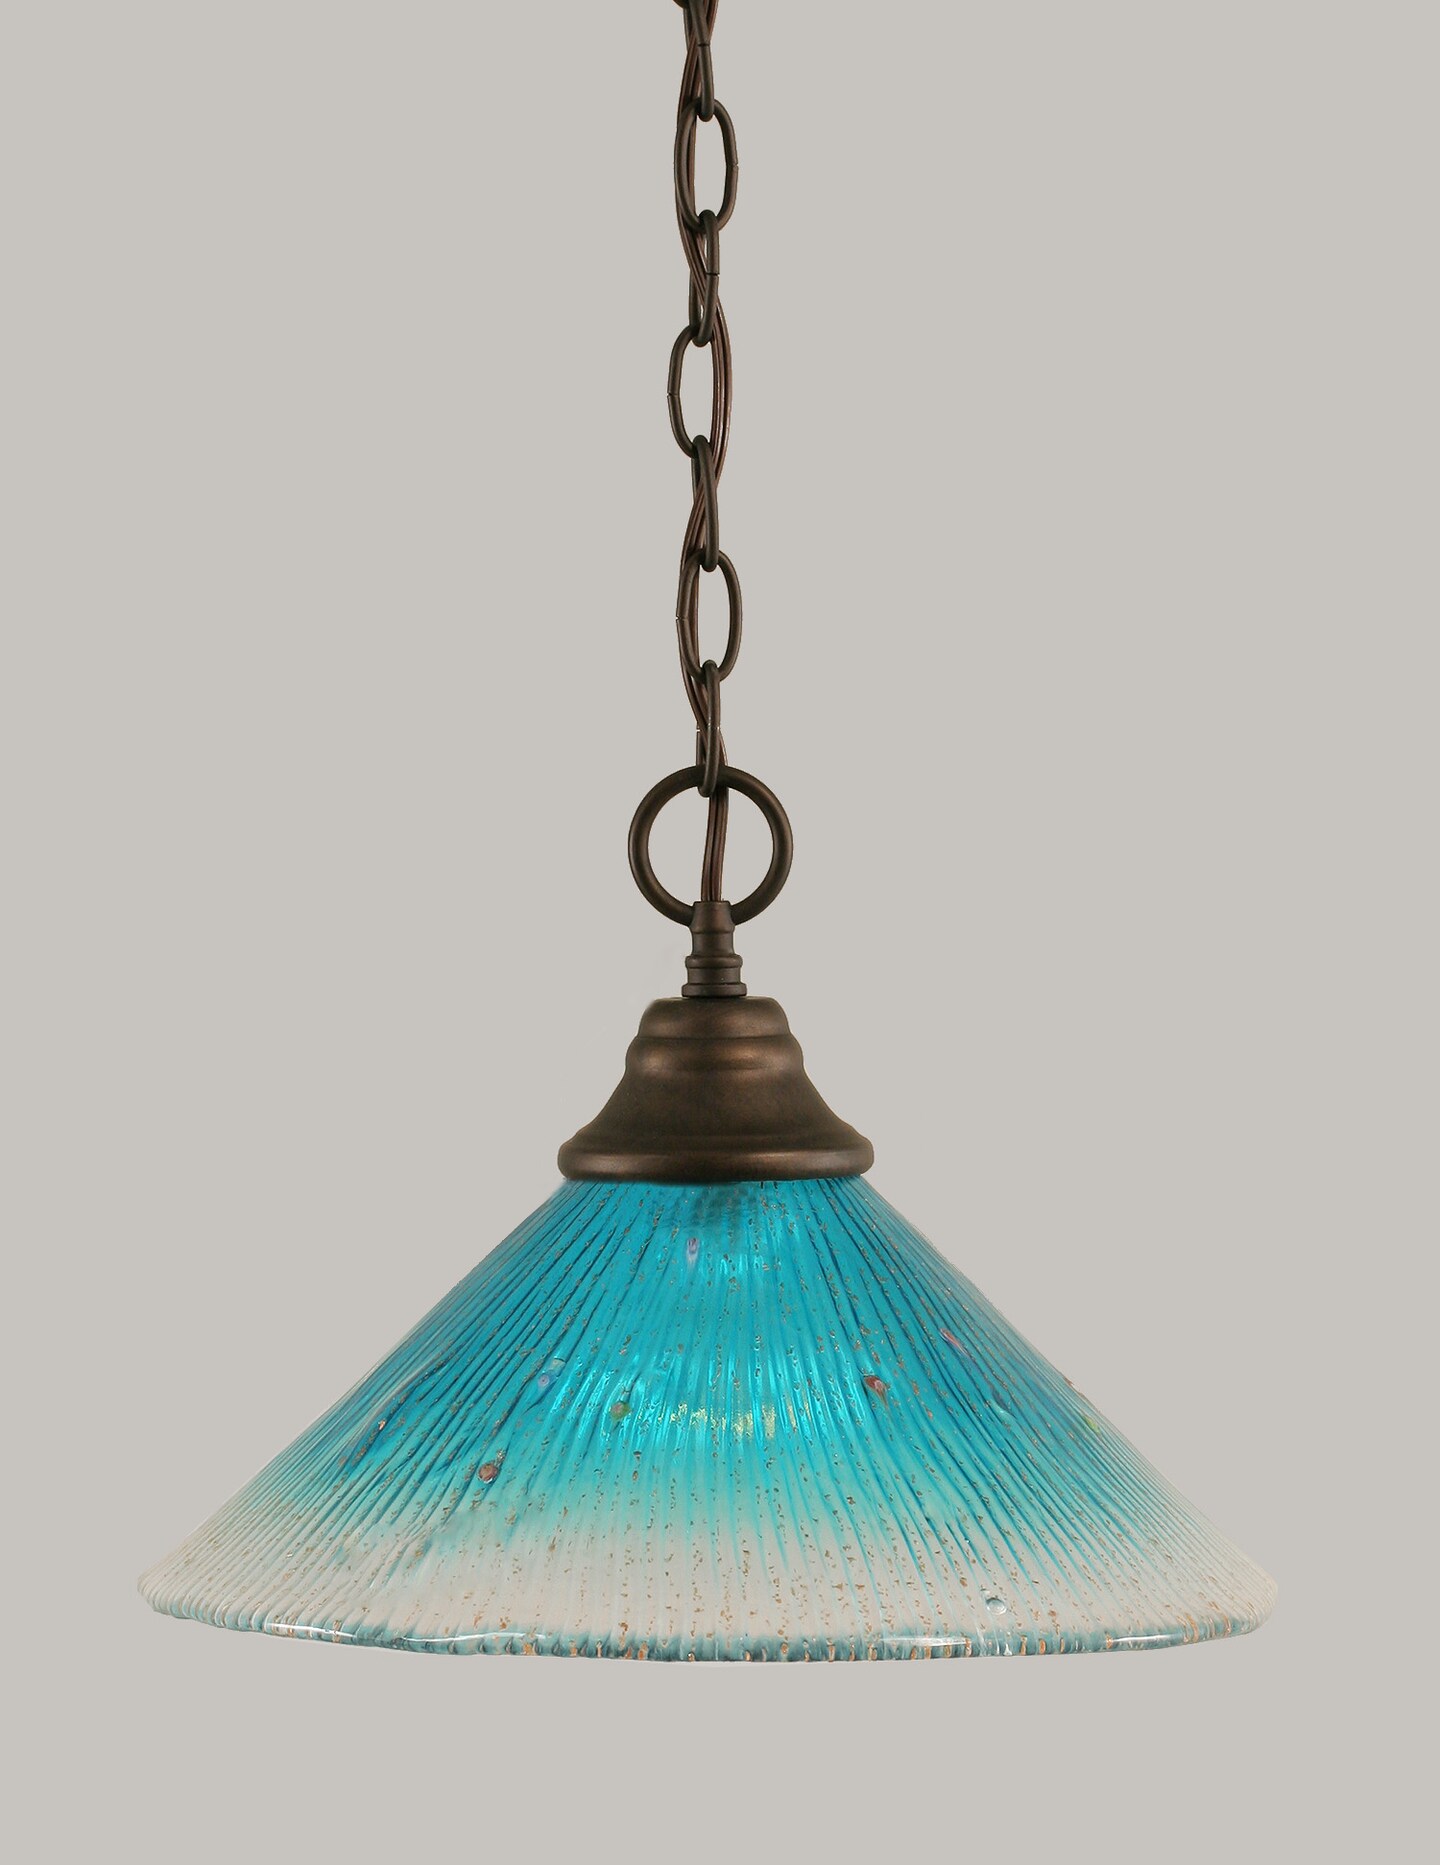 Chain Hung Pendant Shown In Bronze Finish With 12 Teal Crystal Glass